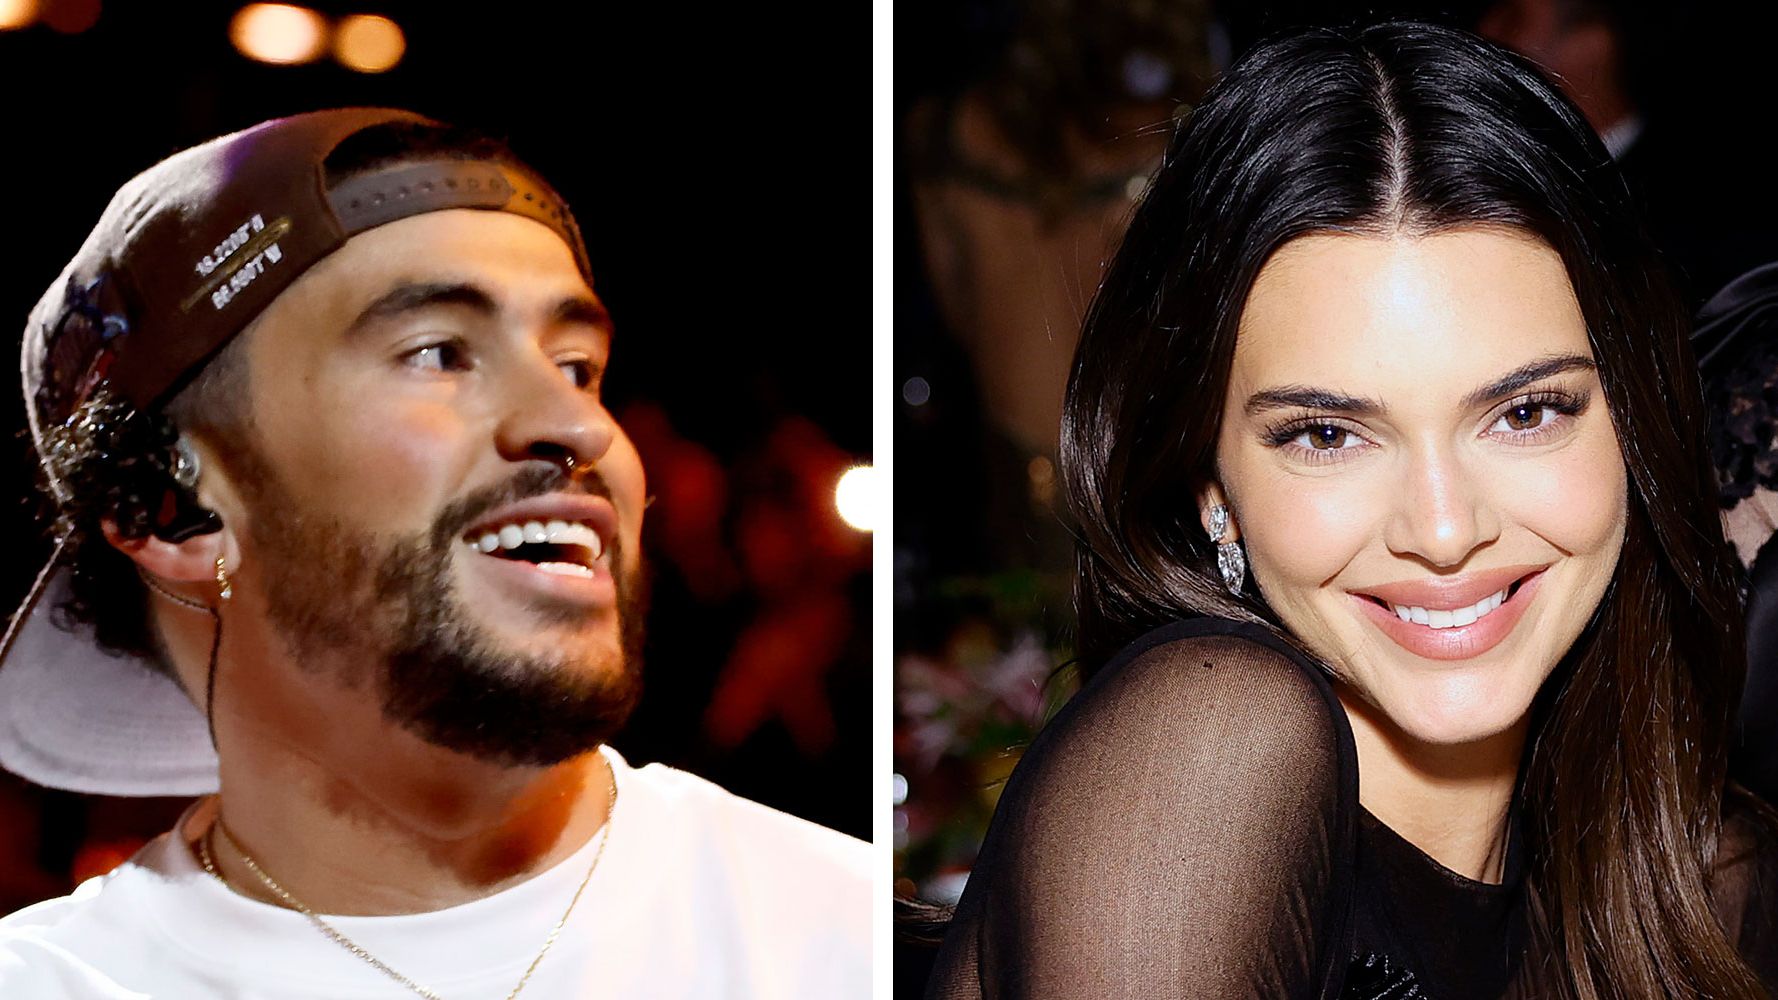 Are Kendall Jenner and Bad Bunny Really Dating? - New Relationship Details